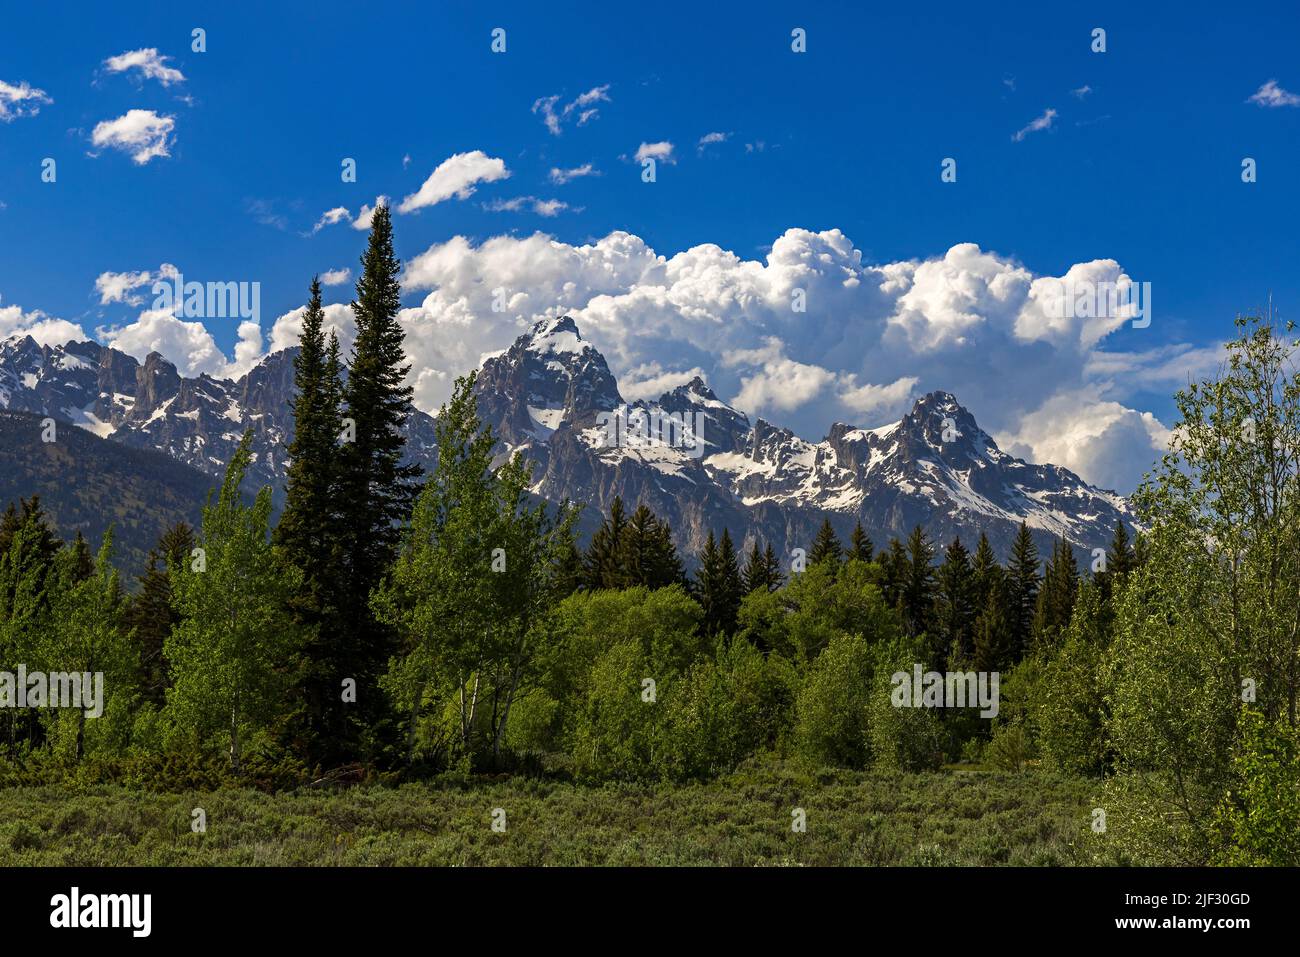 This is a view of Grand Teton Peak (center) the highest peak in the Teton Range in Grand Teton National Park, Wyoming, USA. Stock Photo